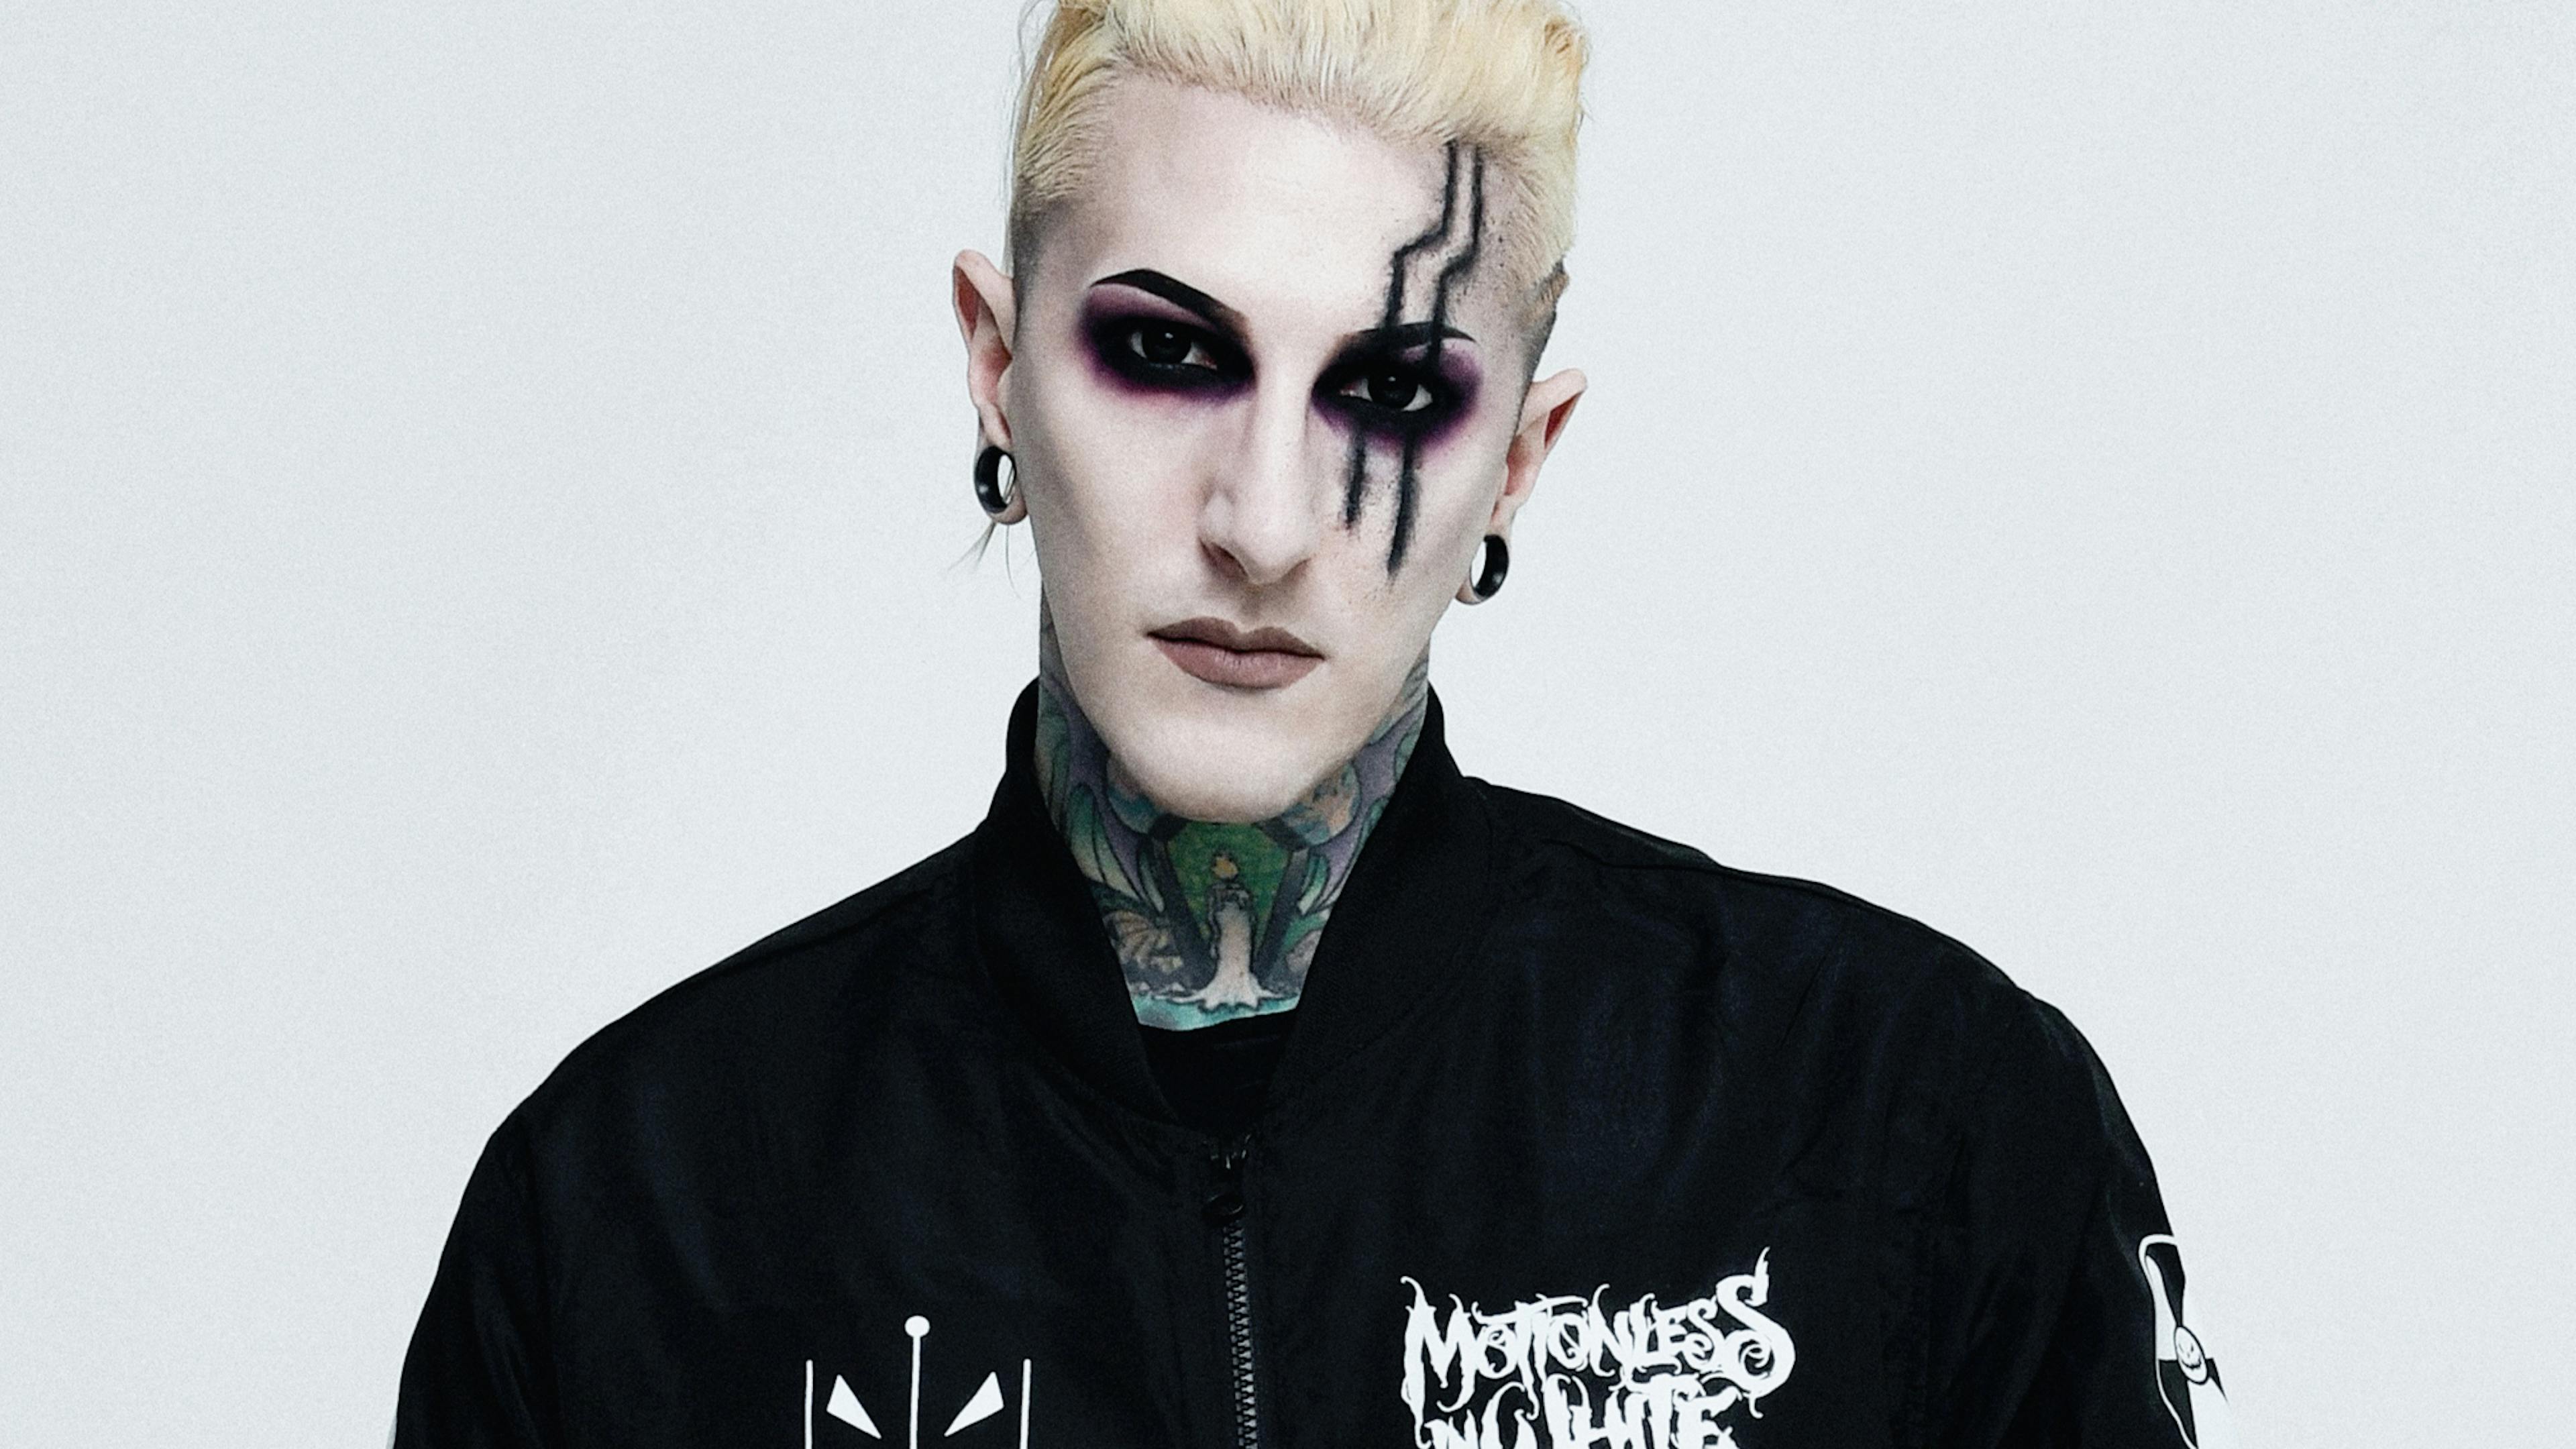 “Security guards started a full-on brawl with us”: 13 Questions with Chris Motionless